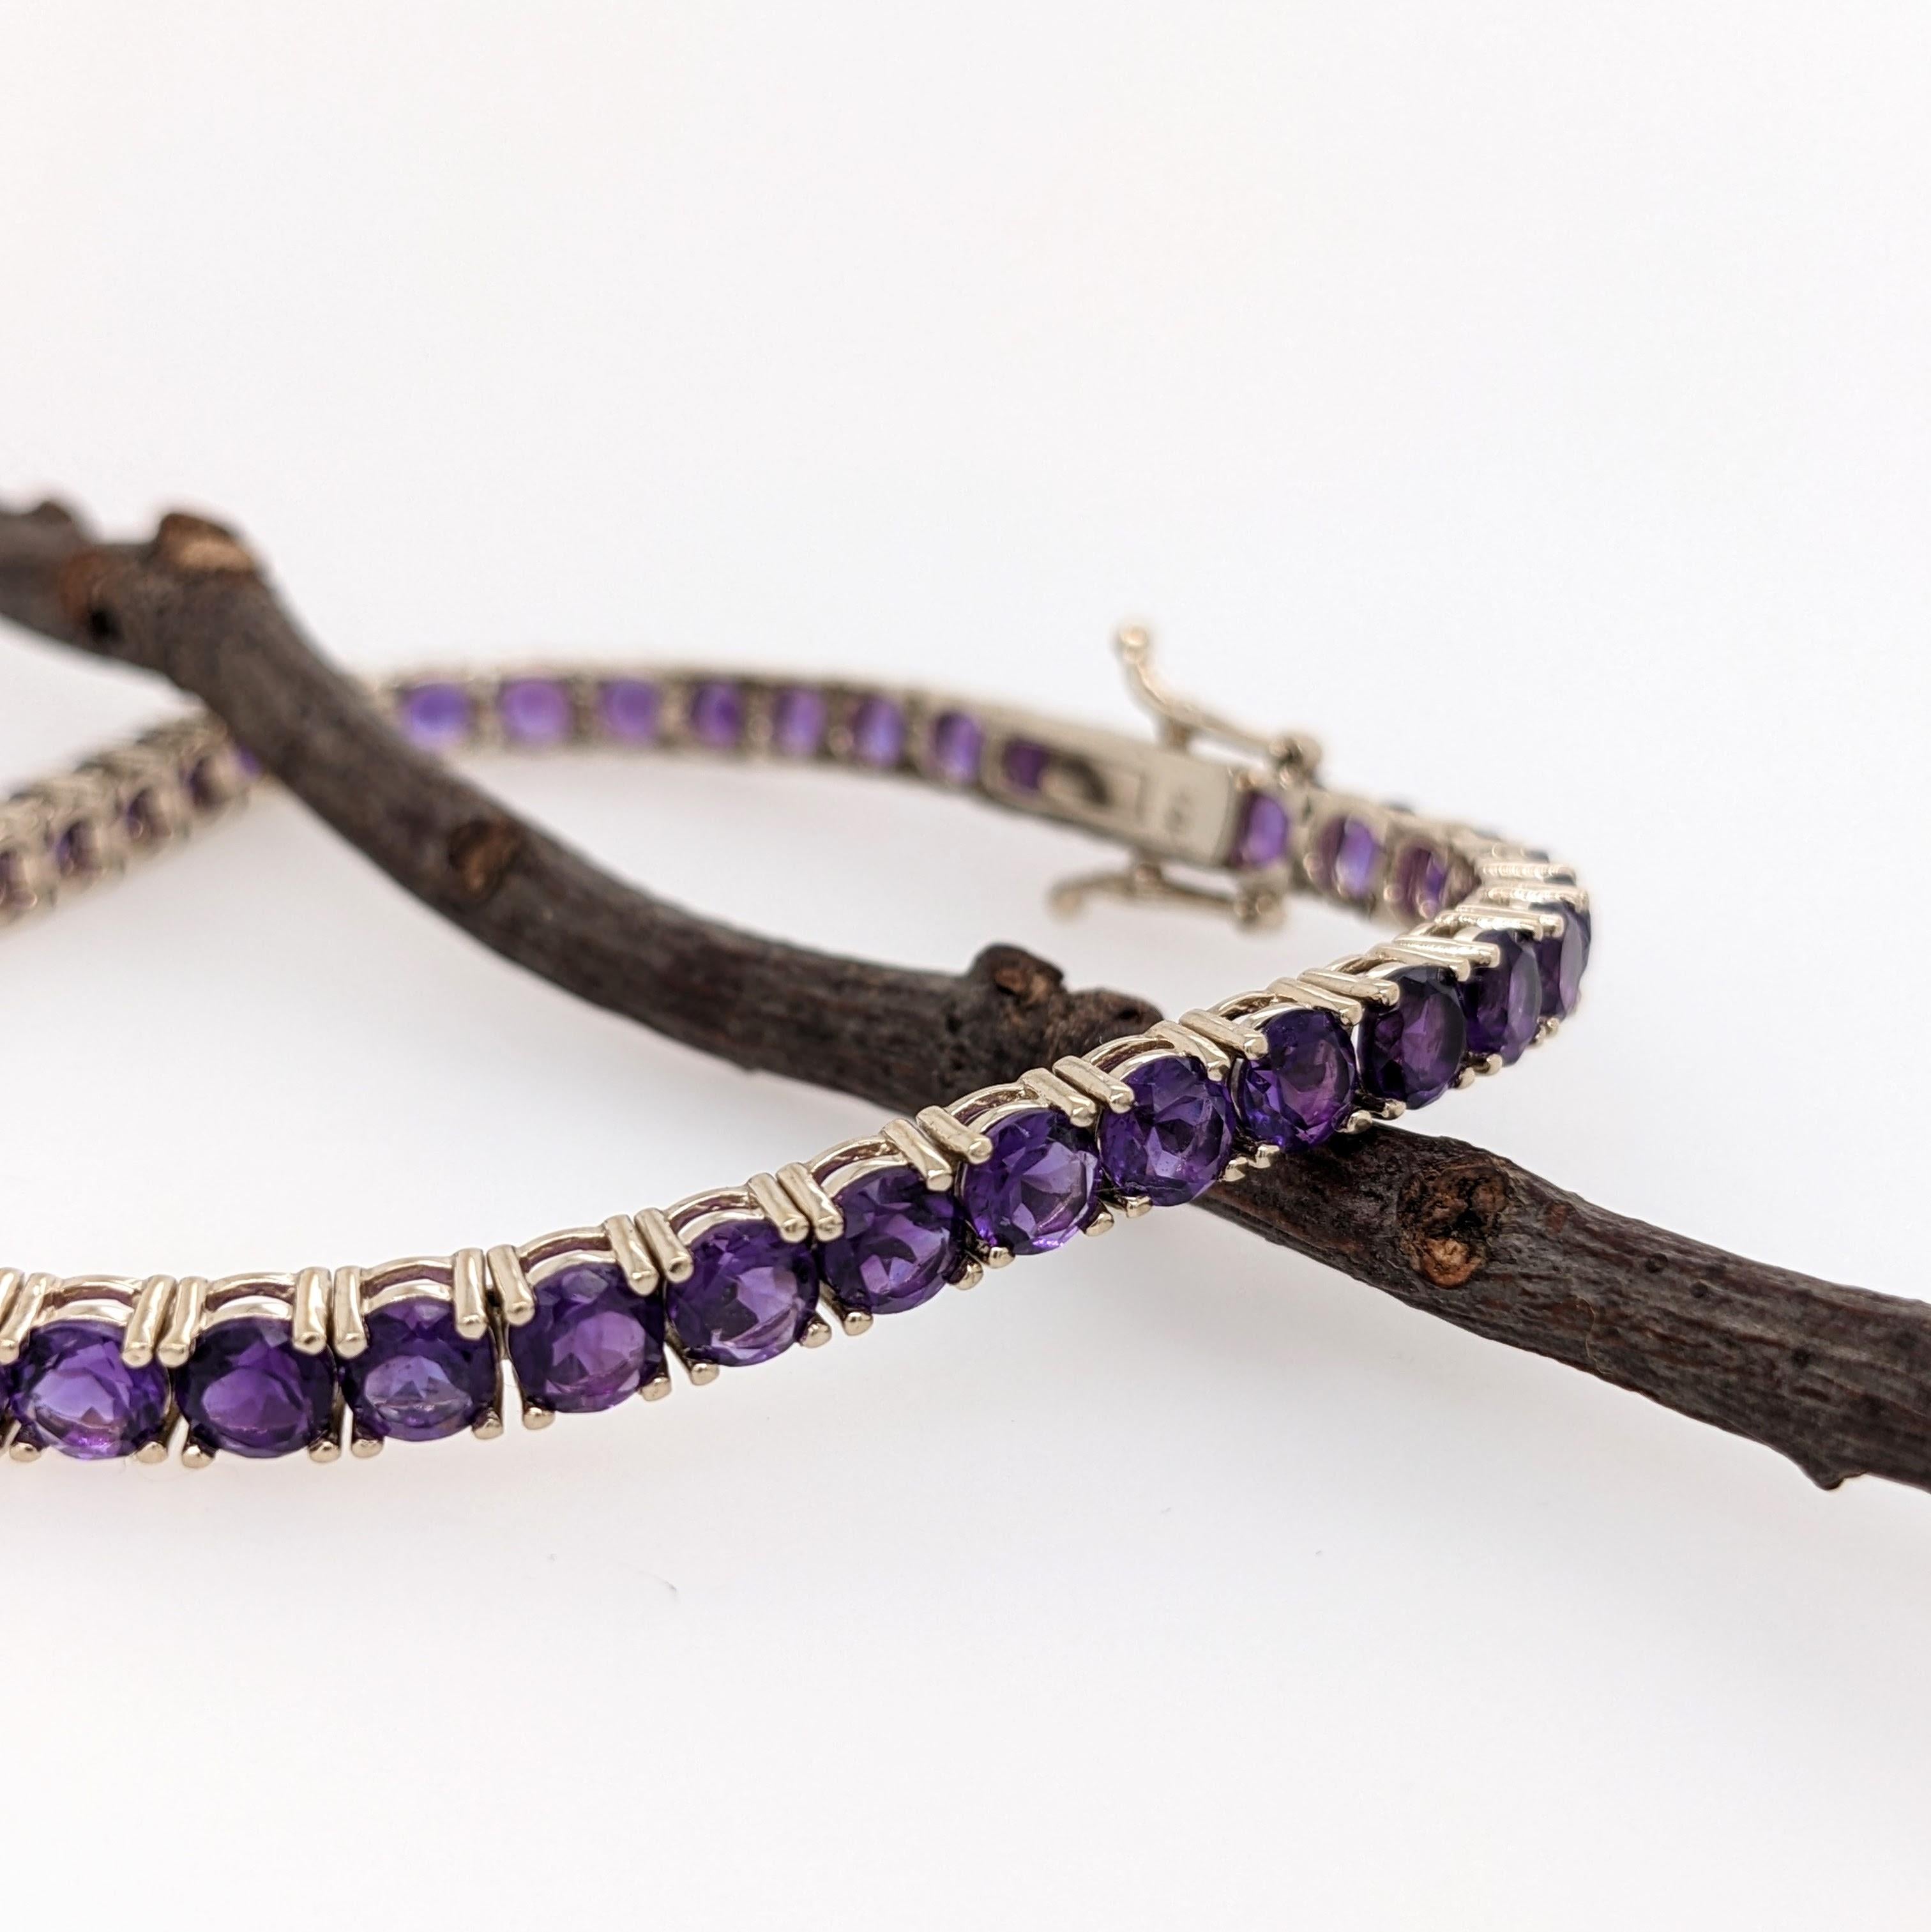 Adorn your wrist with this classic tennis bracelet design featuring 46 round Amethyst gemstones! A wonderful piece of jewelry to gift lovers of purple and February birthdays.

Specifications

Item Type: Bracelet
Center Stone: Amethyst
Treatment: